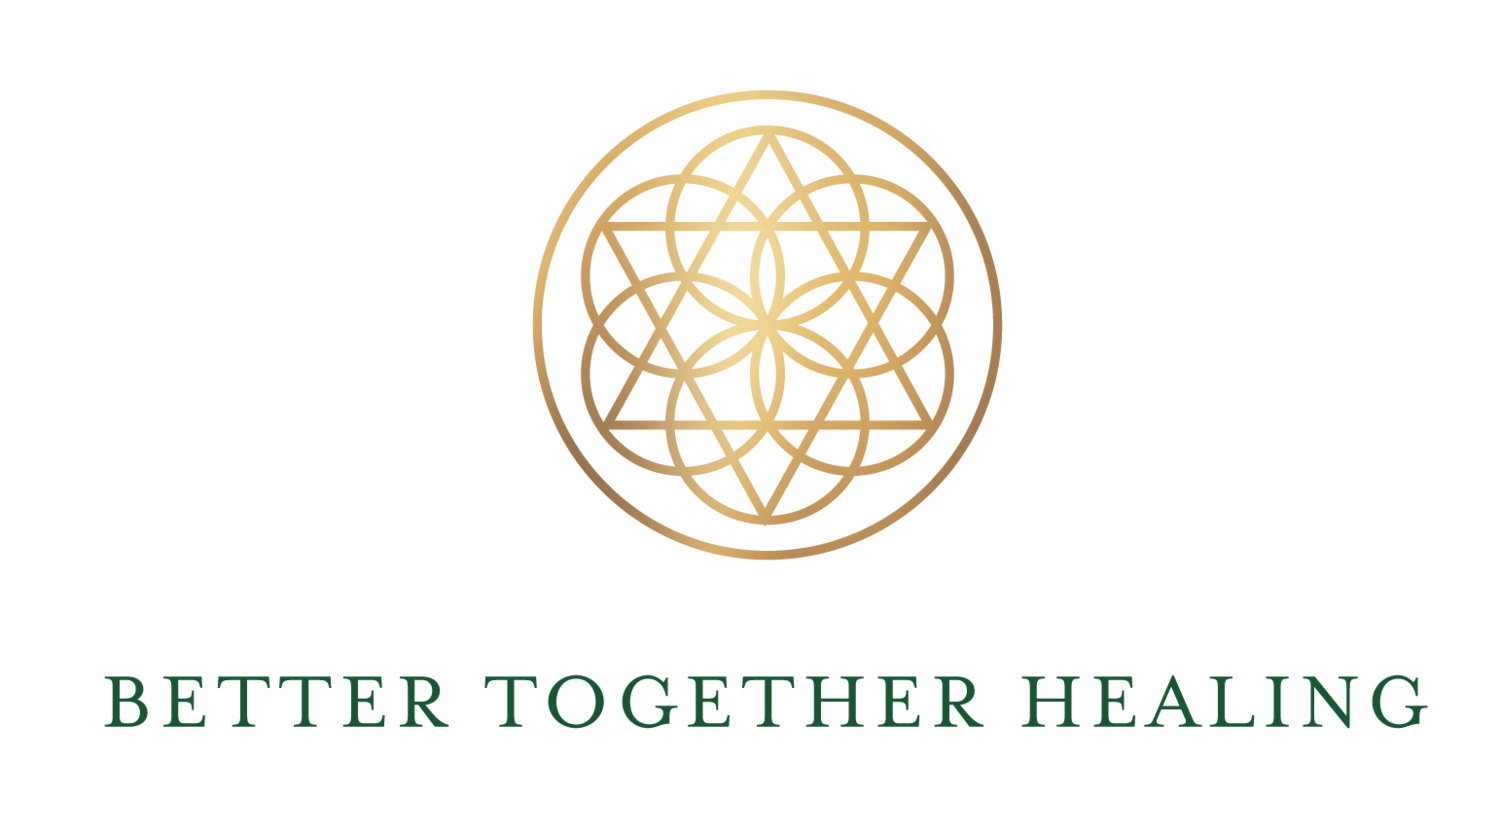 Better Together Healing